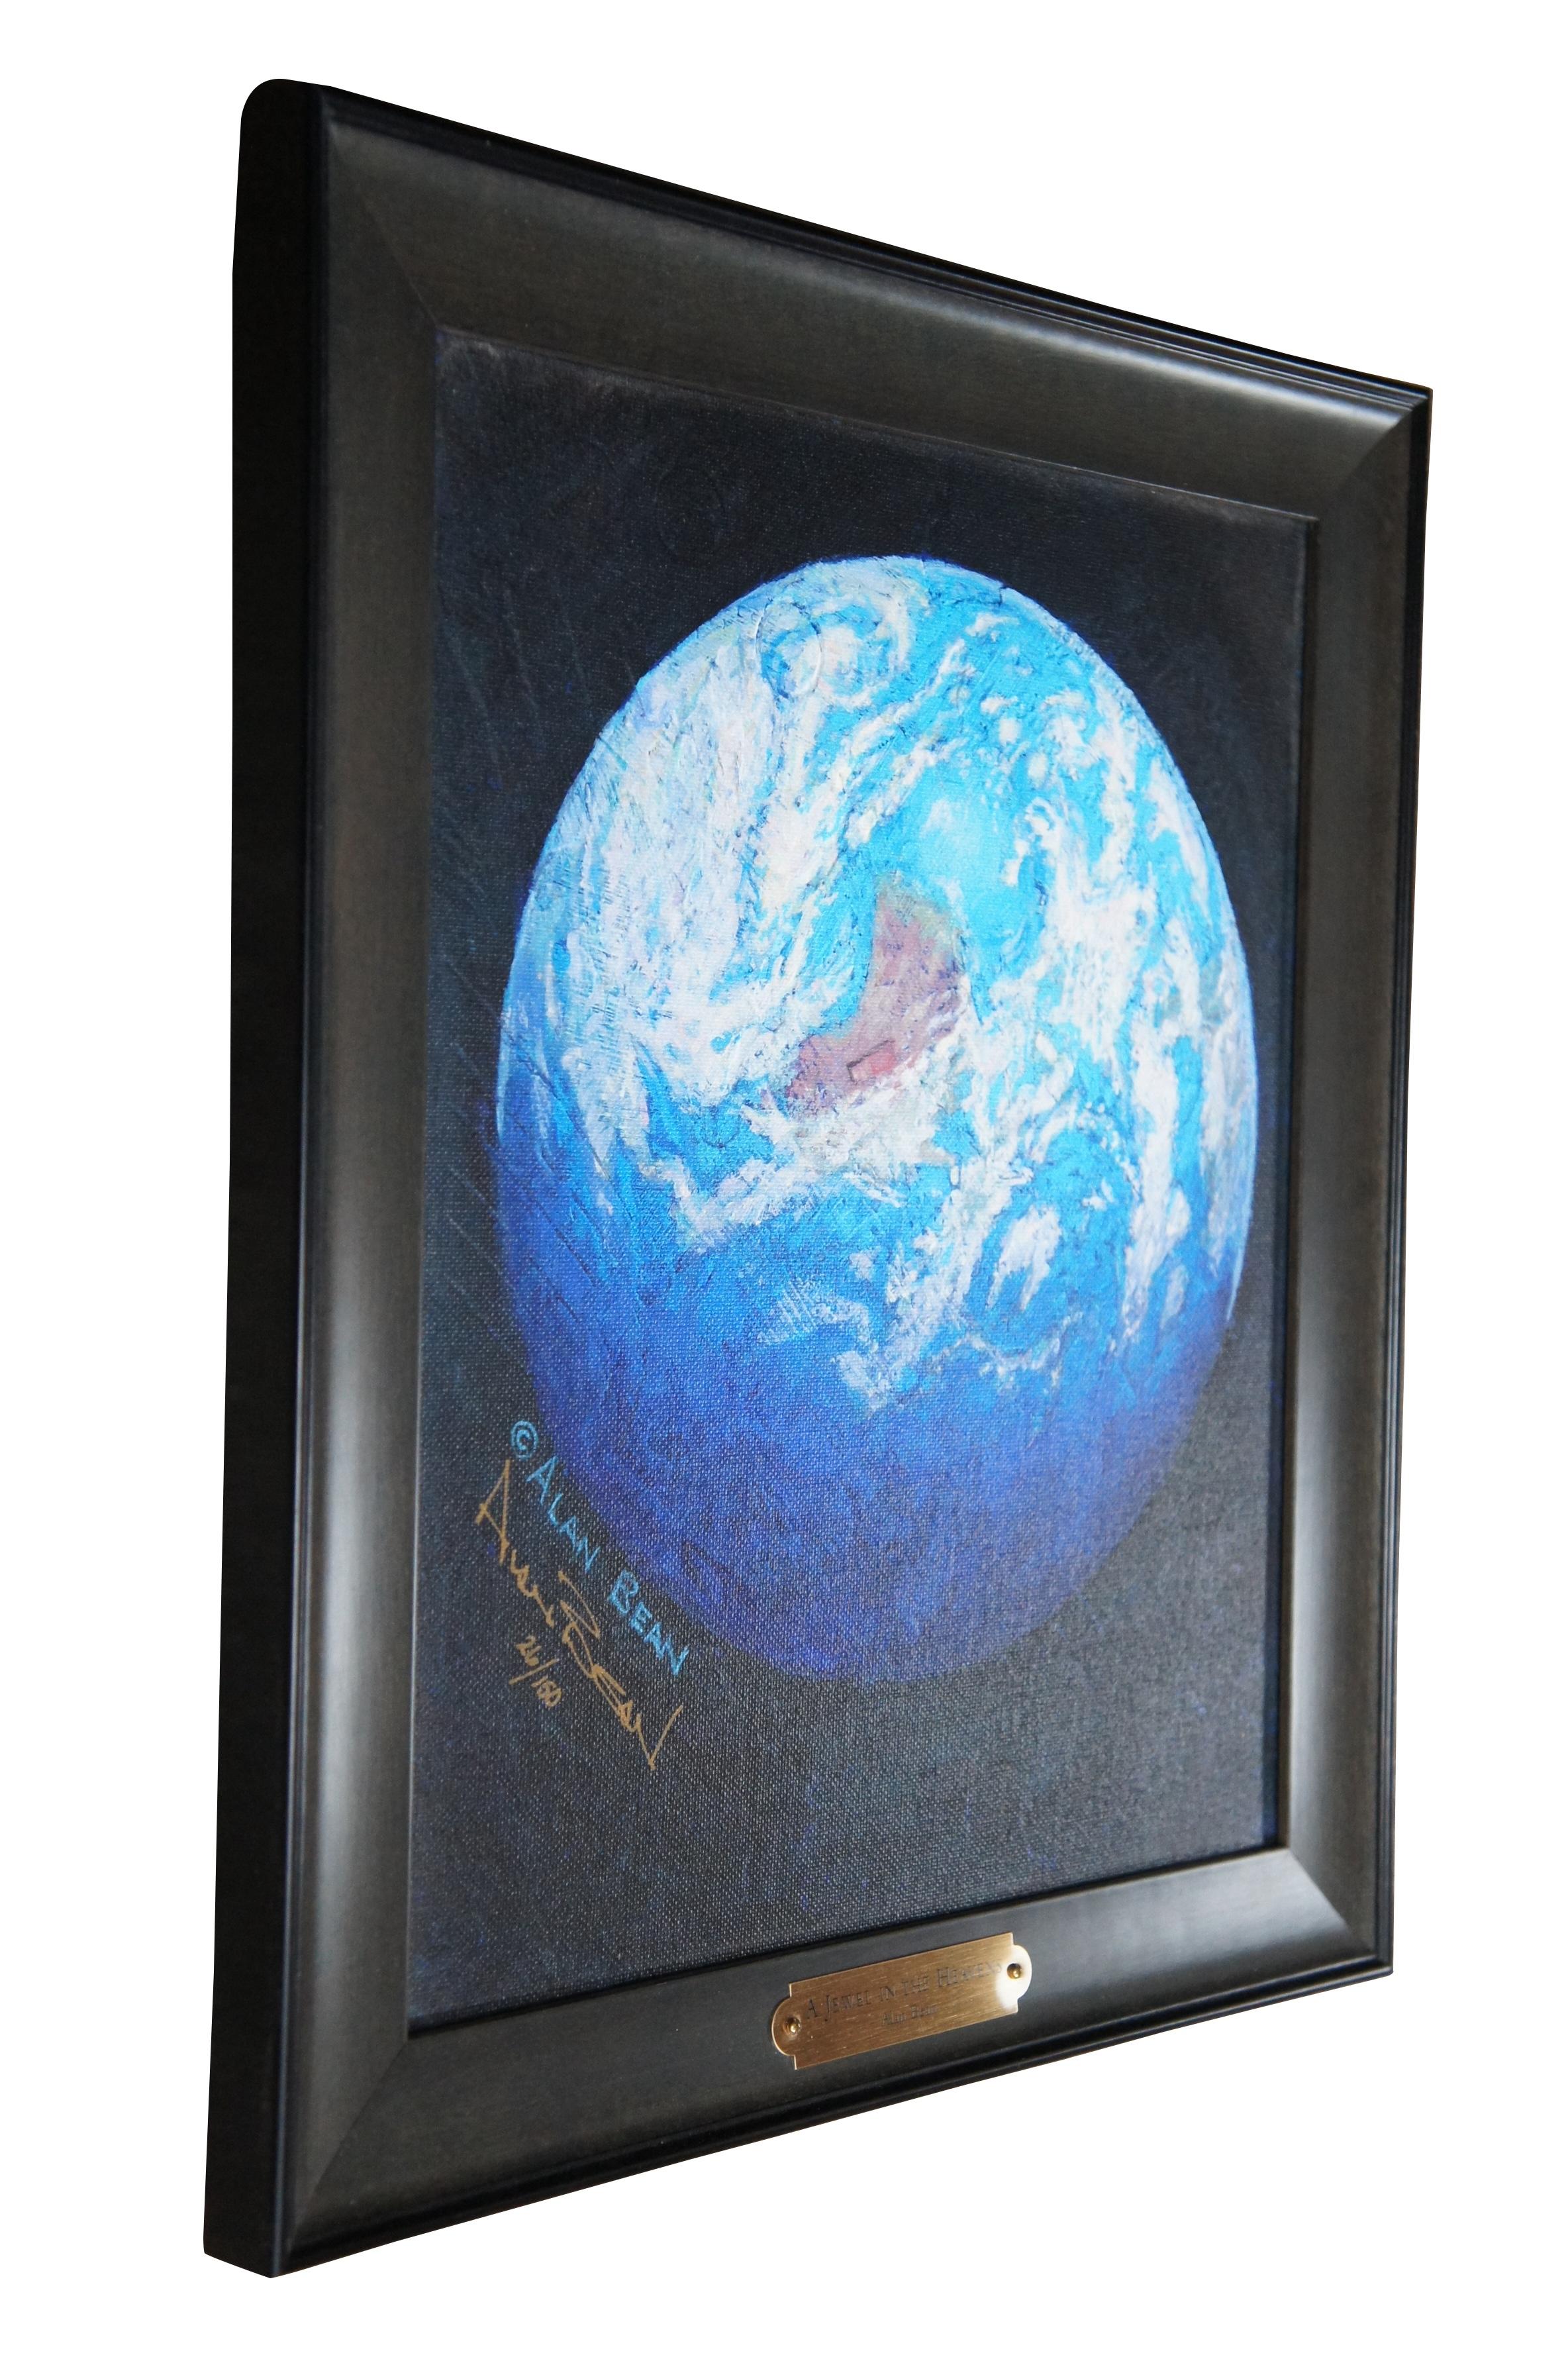 Alan Bean A Jewel In The Heavens Earth From Space Giclee On Canvas 17